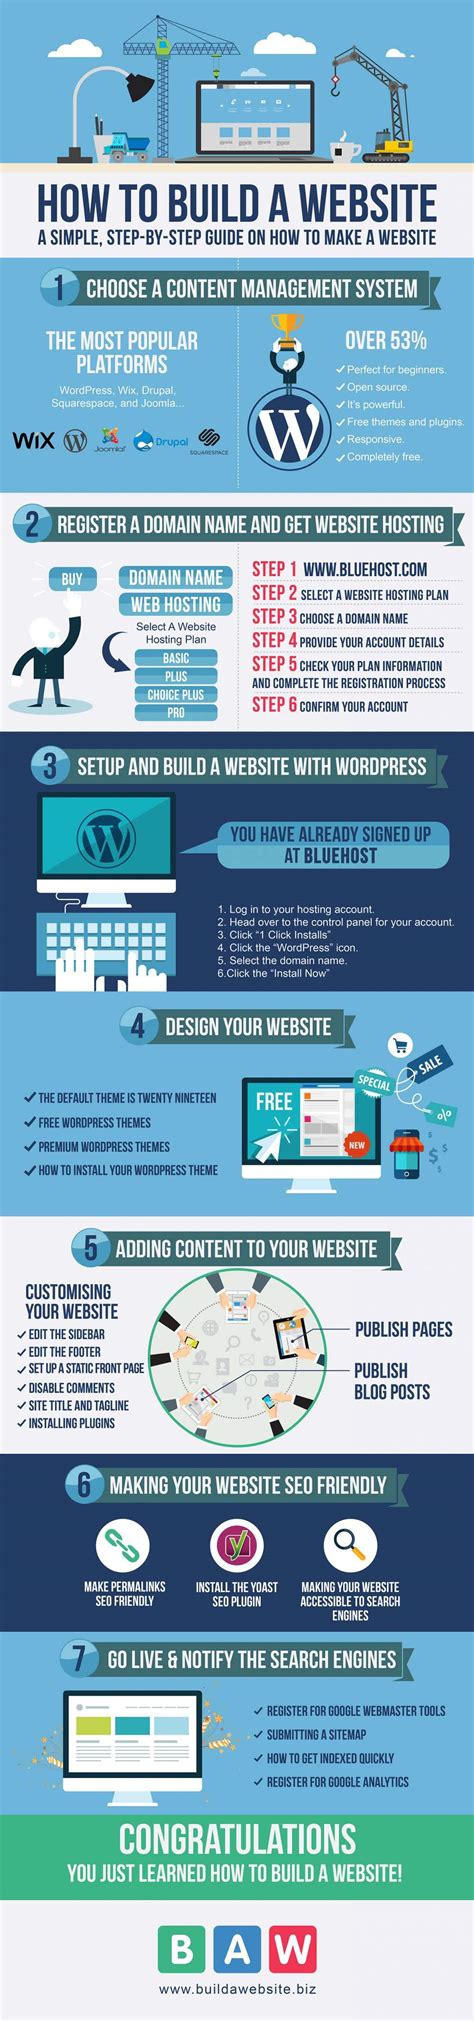 How To Build A Website Infographic Visualistan